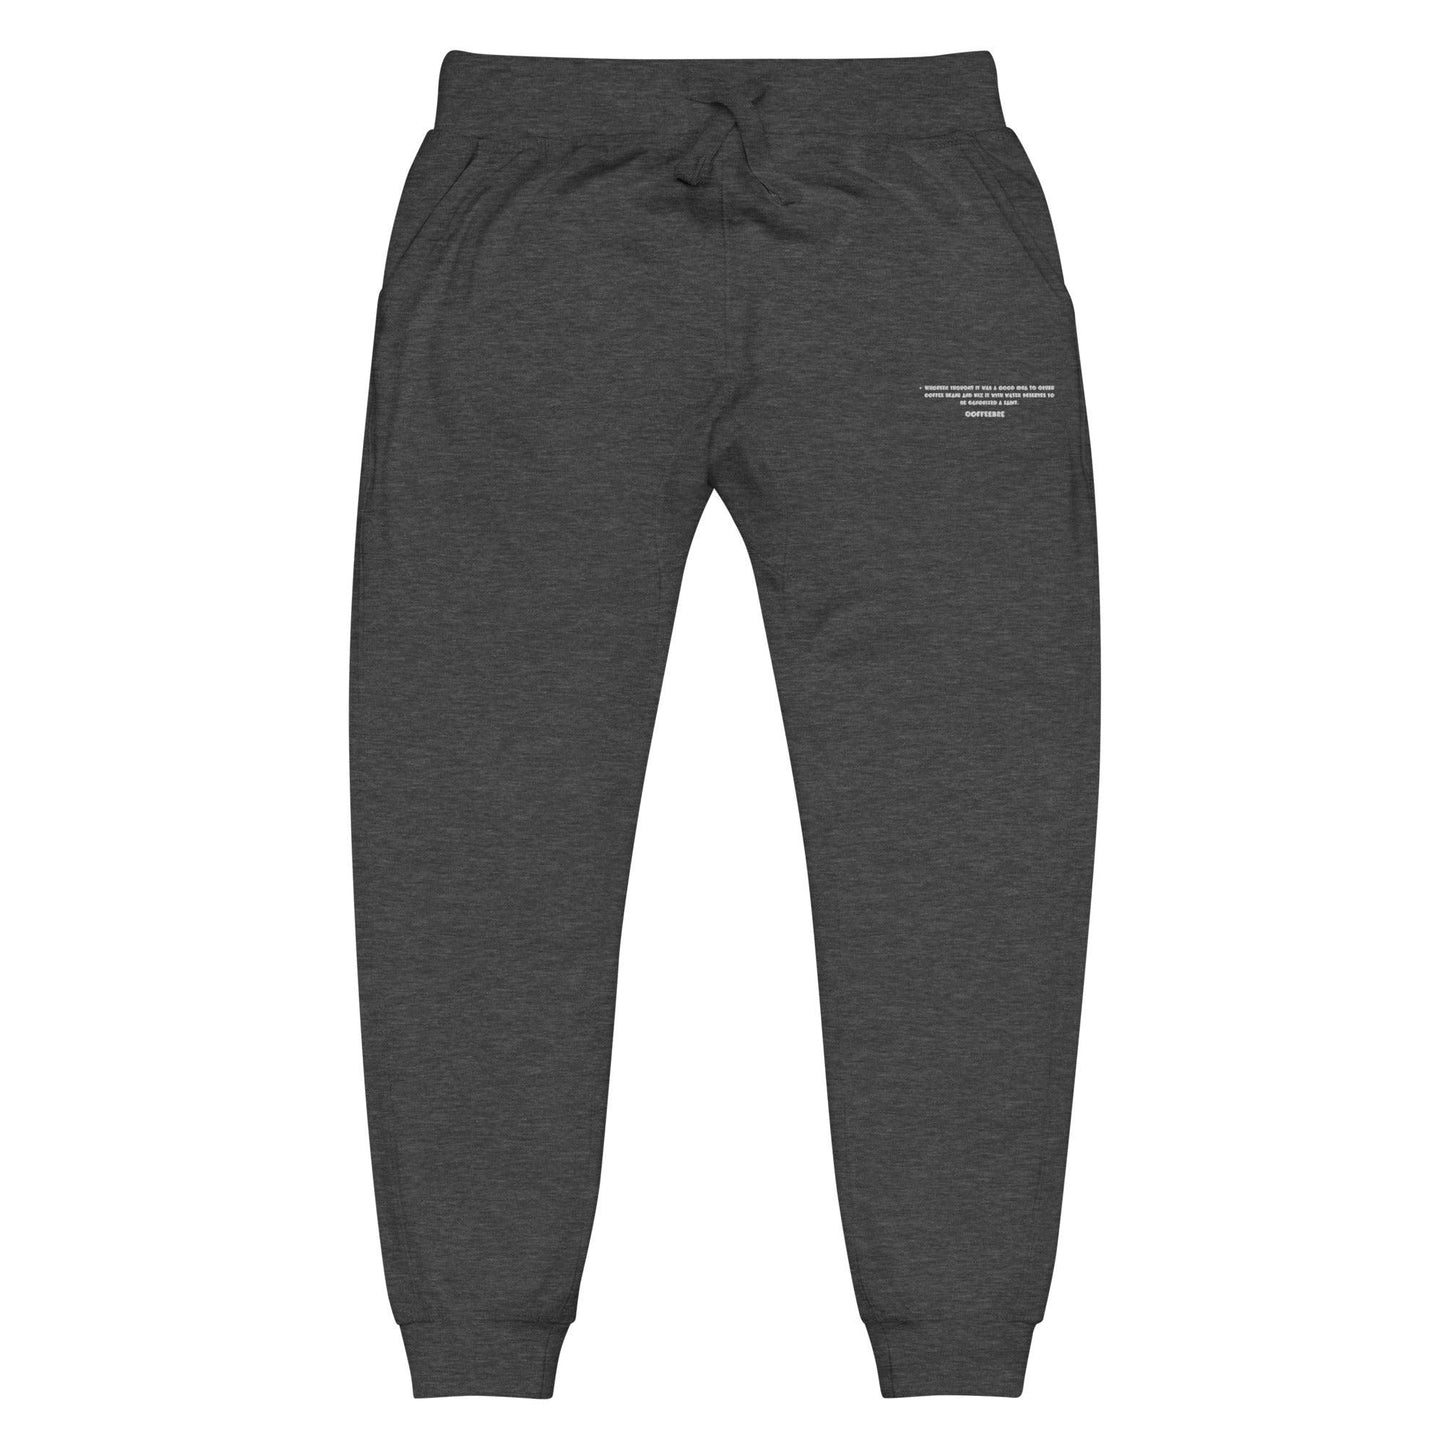 Embroidered Casual Athleisure Fleece Sweatpants - COFFEEBRE